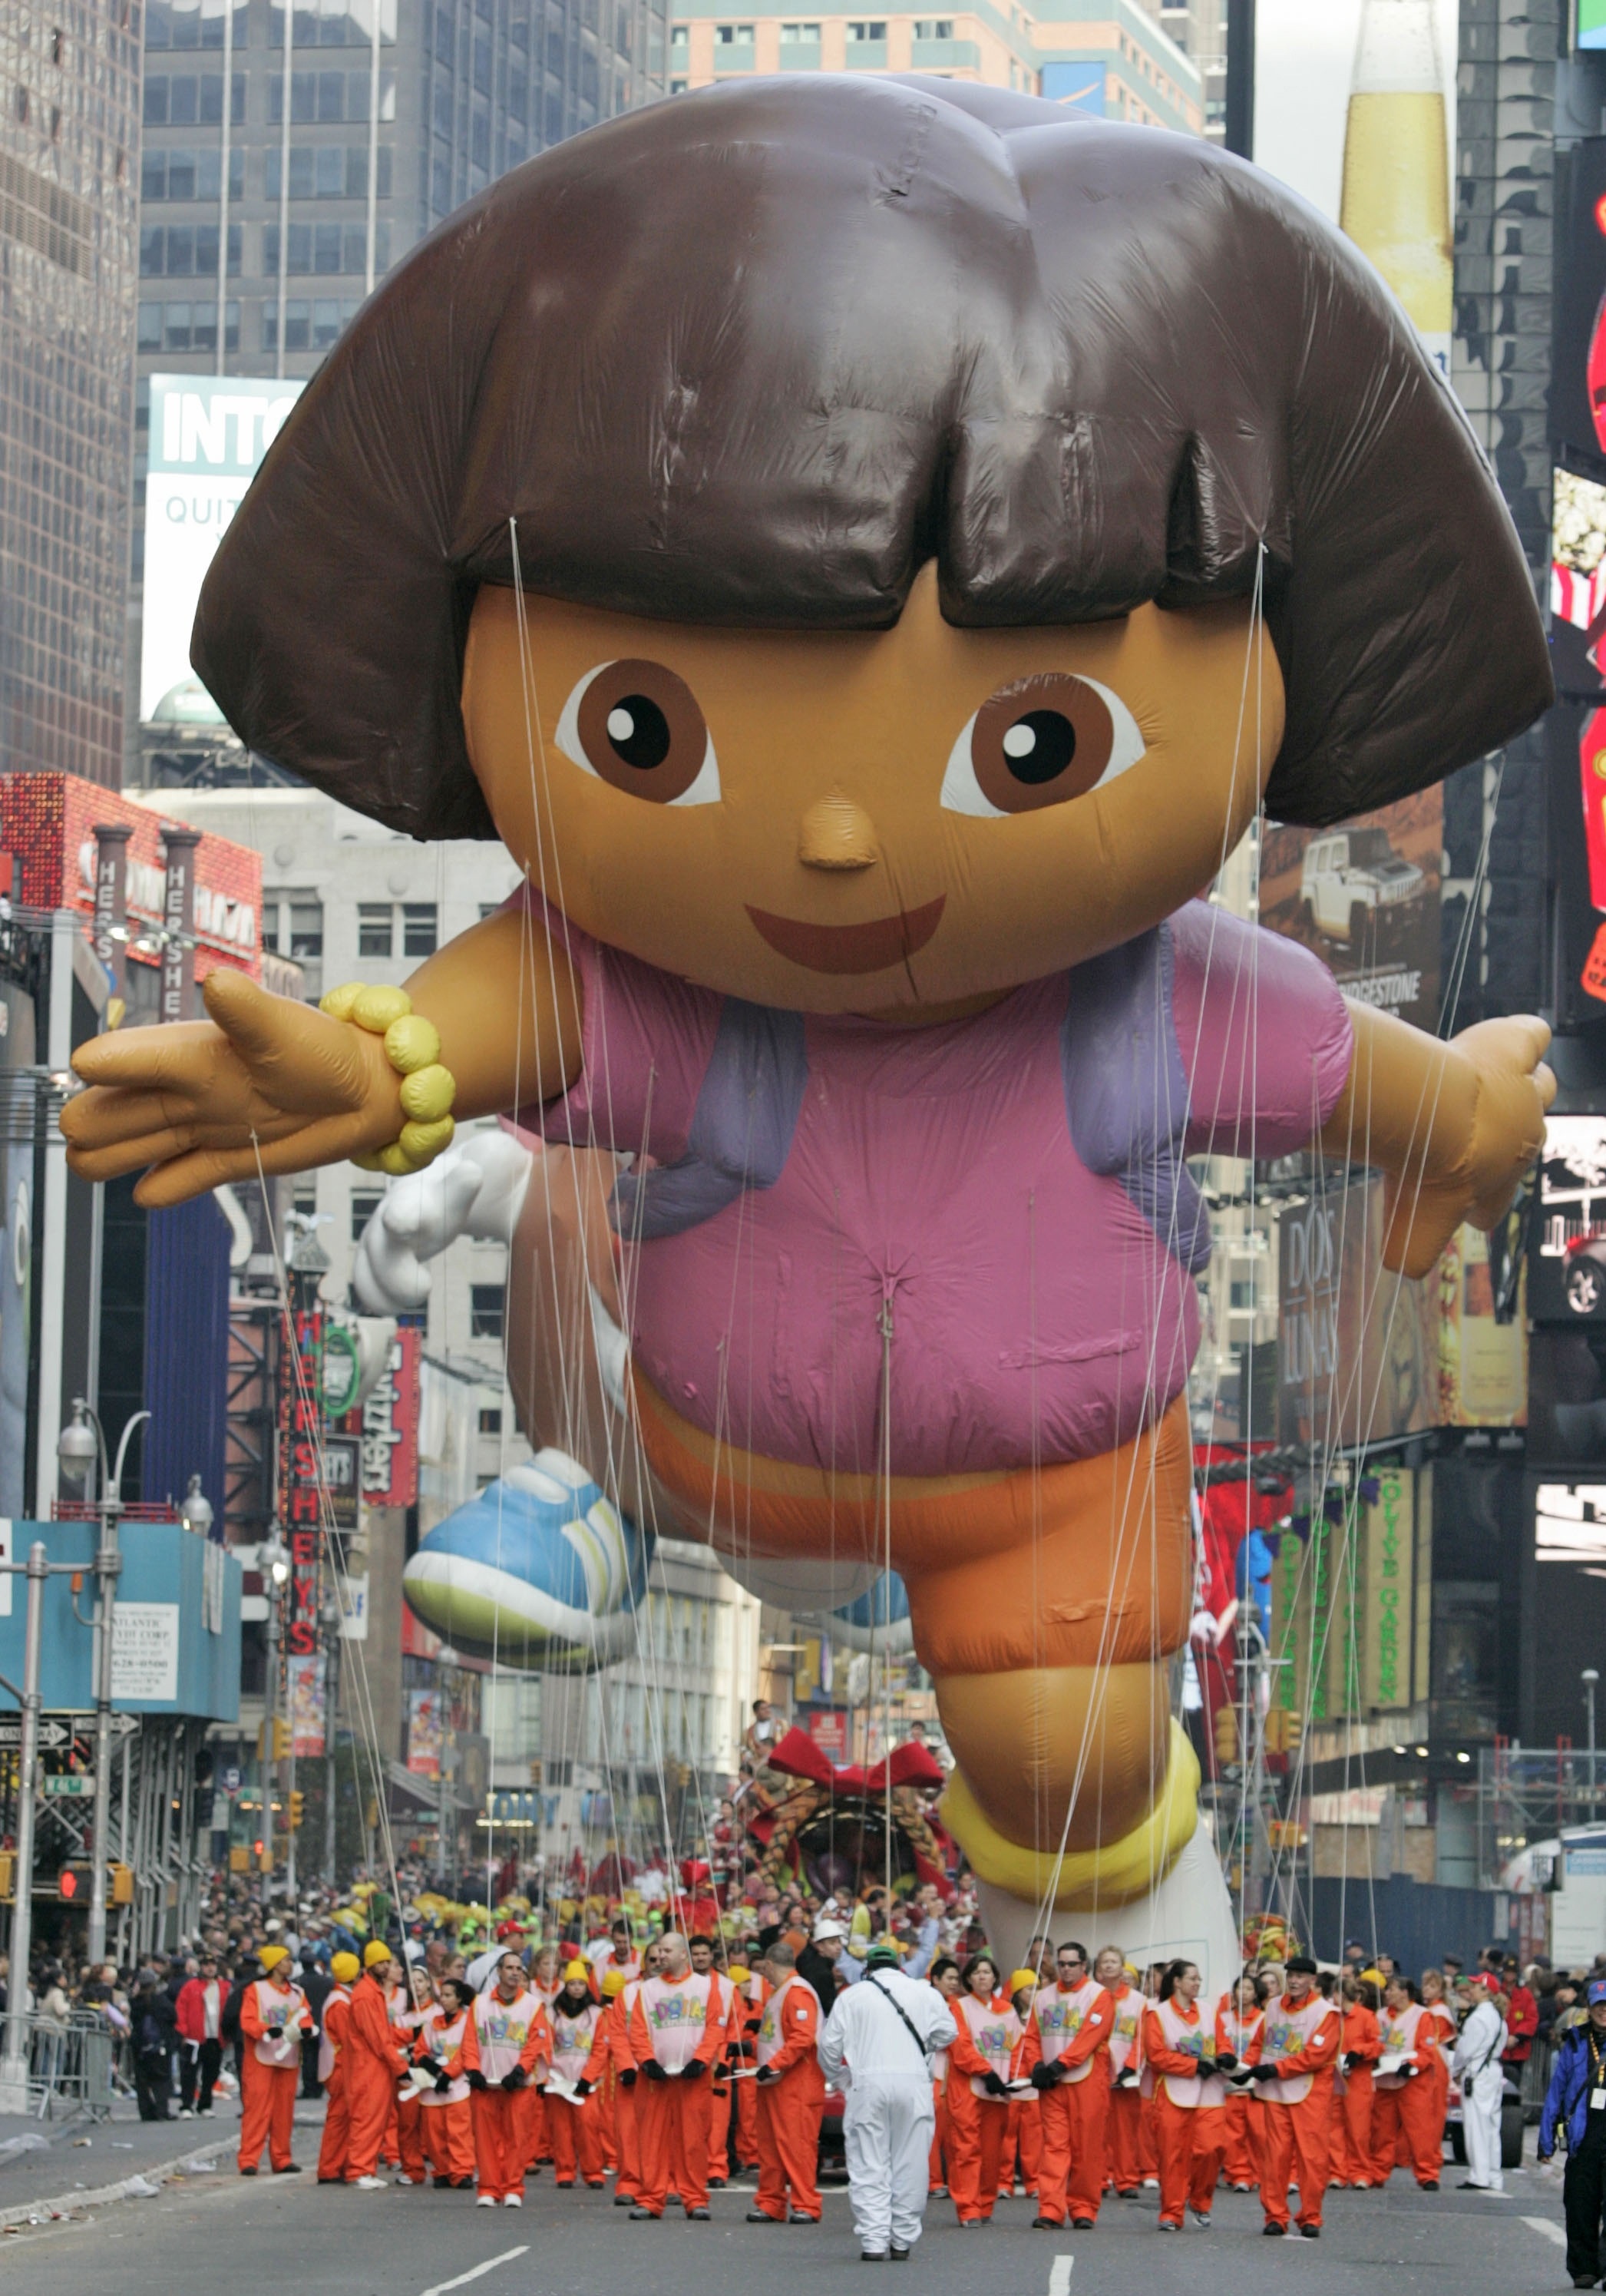 Dora the Explorer' may change a whole generation